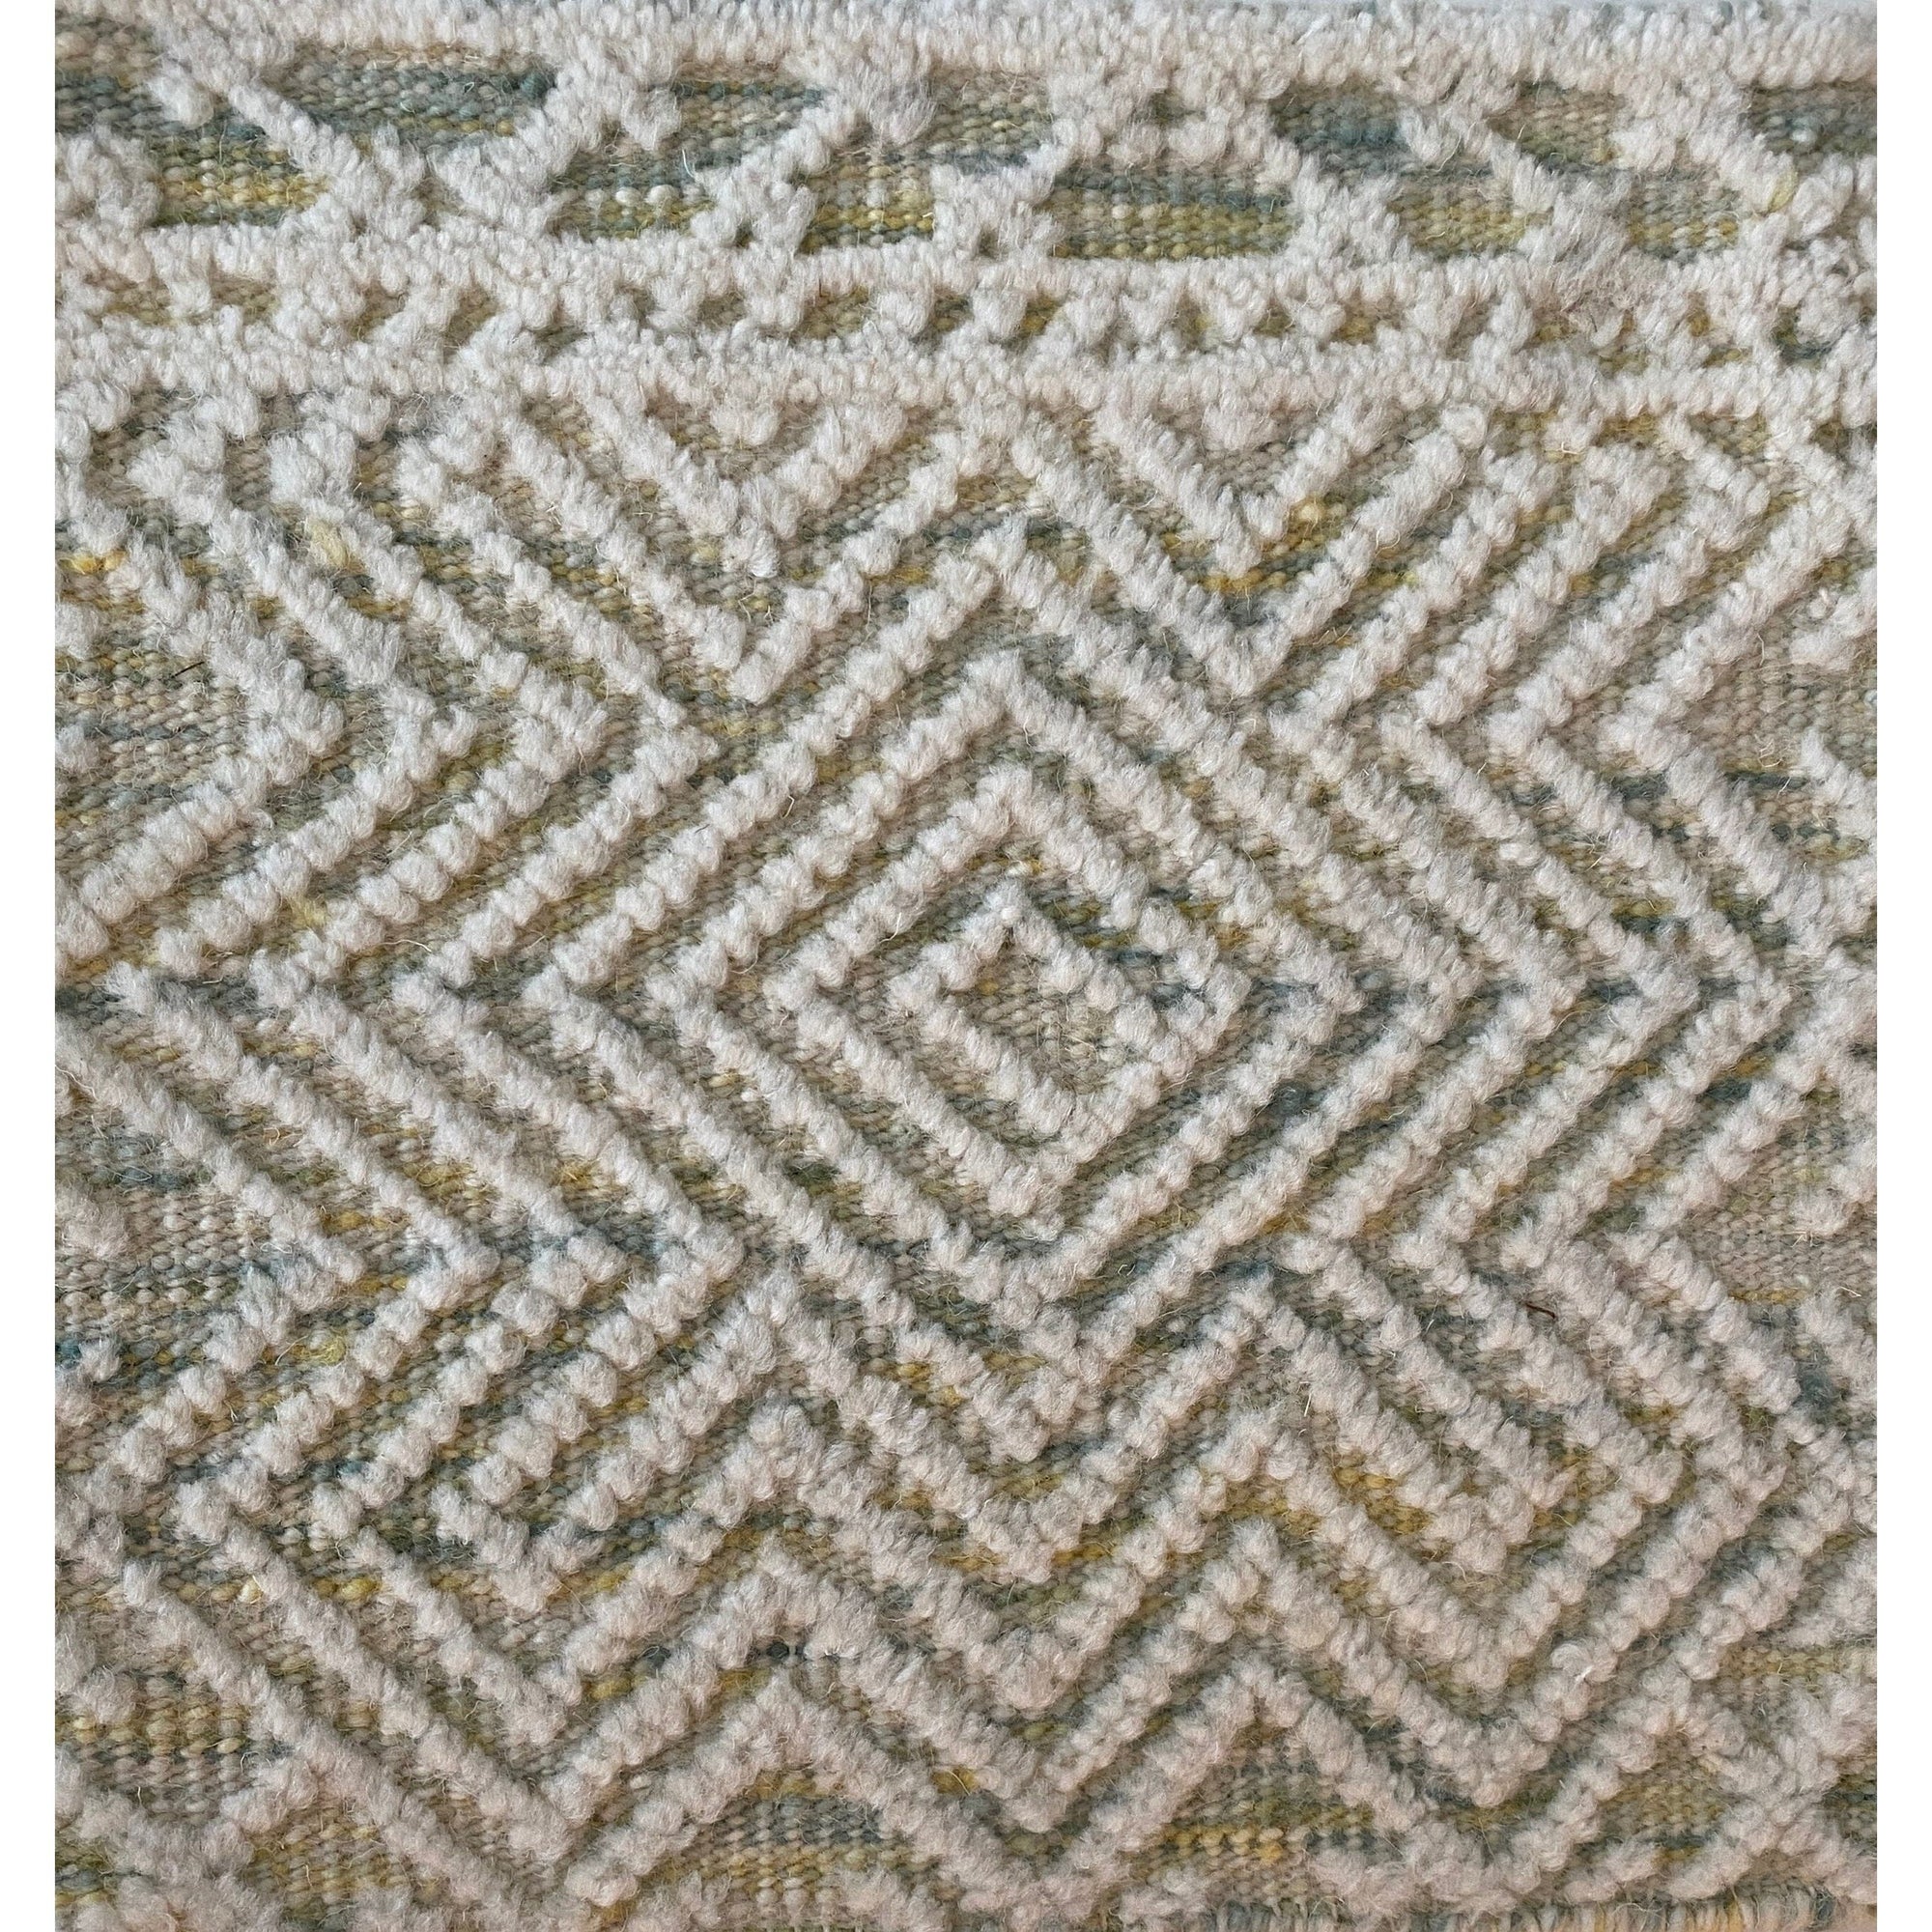 Noah Ivory/Seagrass Handknotted SAMPLE Rugs Organic Weave Shop 12"x12" 